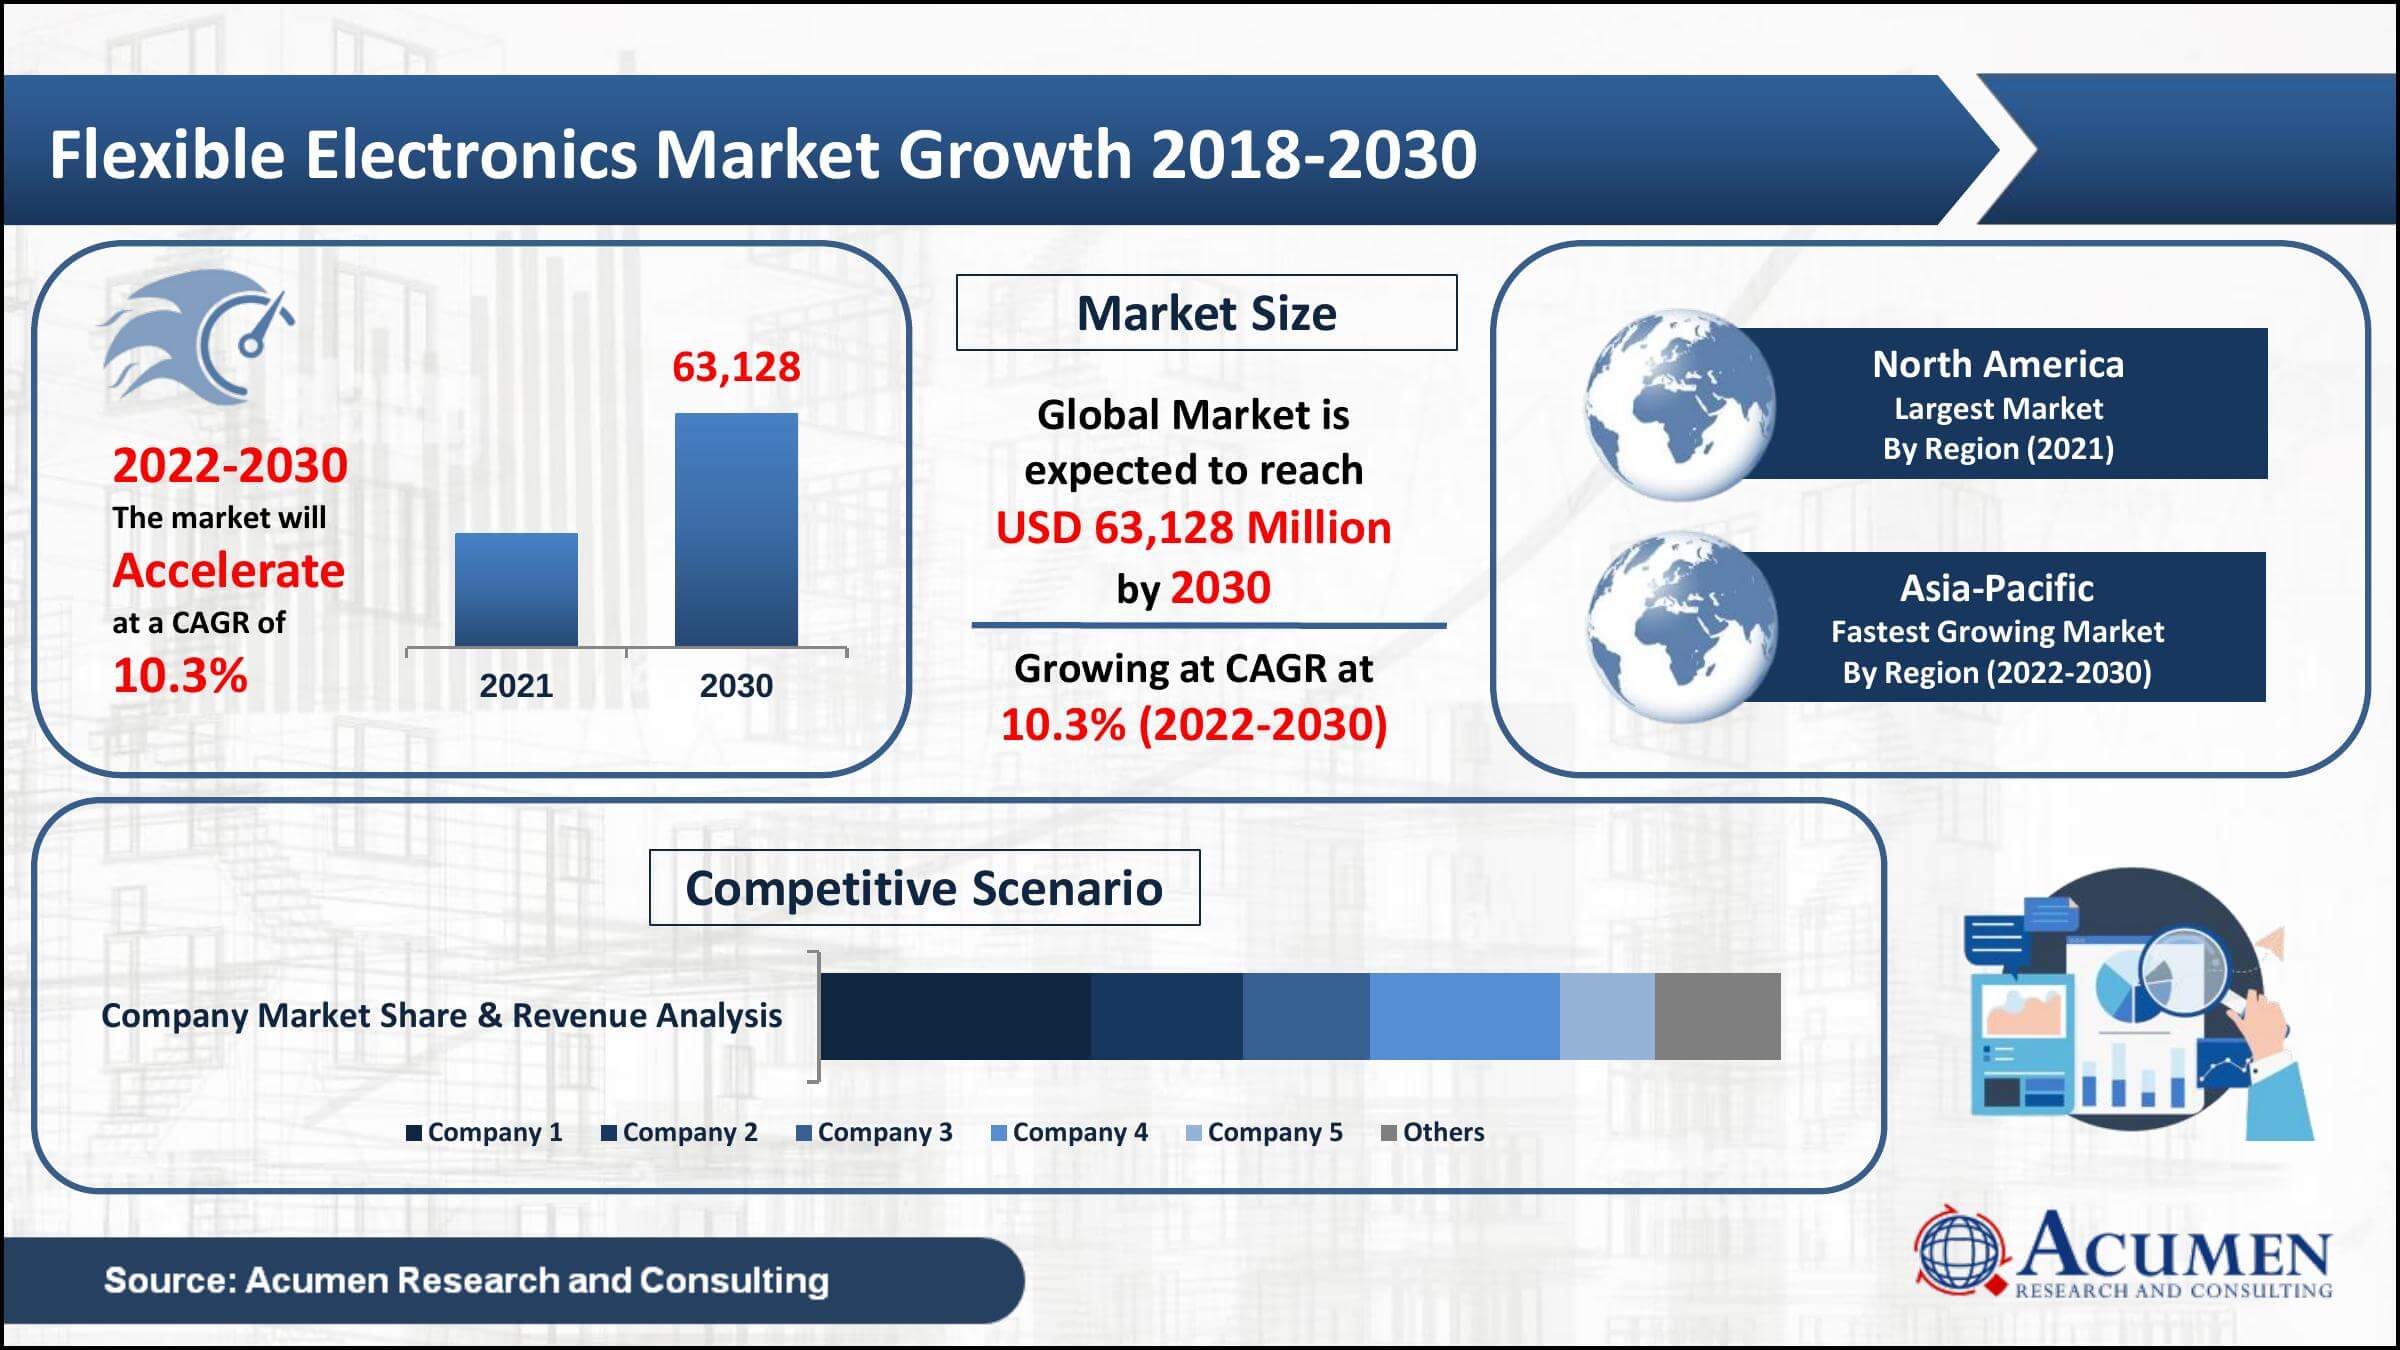 Global flexible electronics market revenue collected USD 26,534 Million in 2021, with a 10.3% CAGR between 2022 and 2030